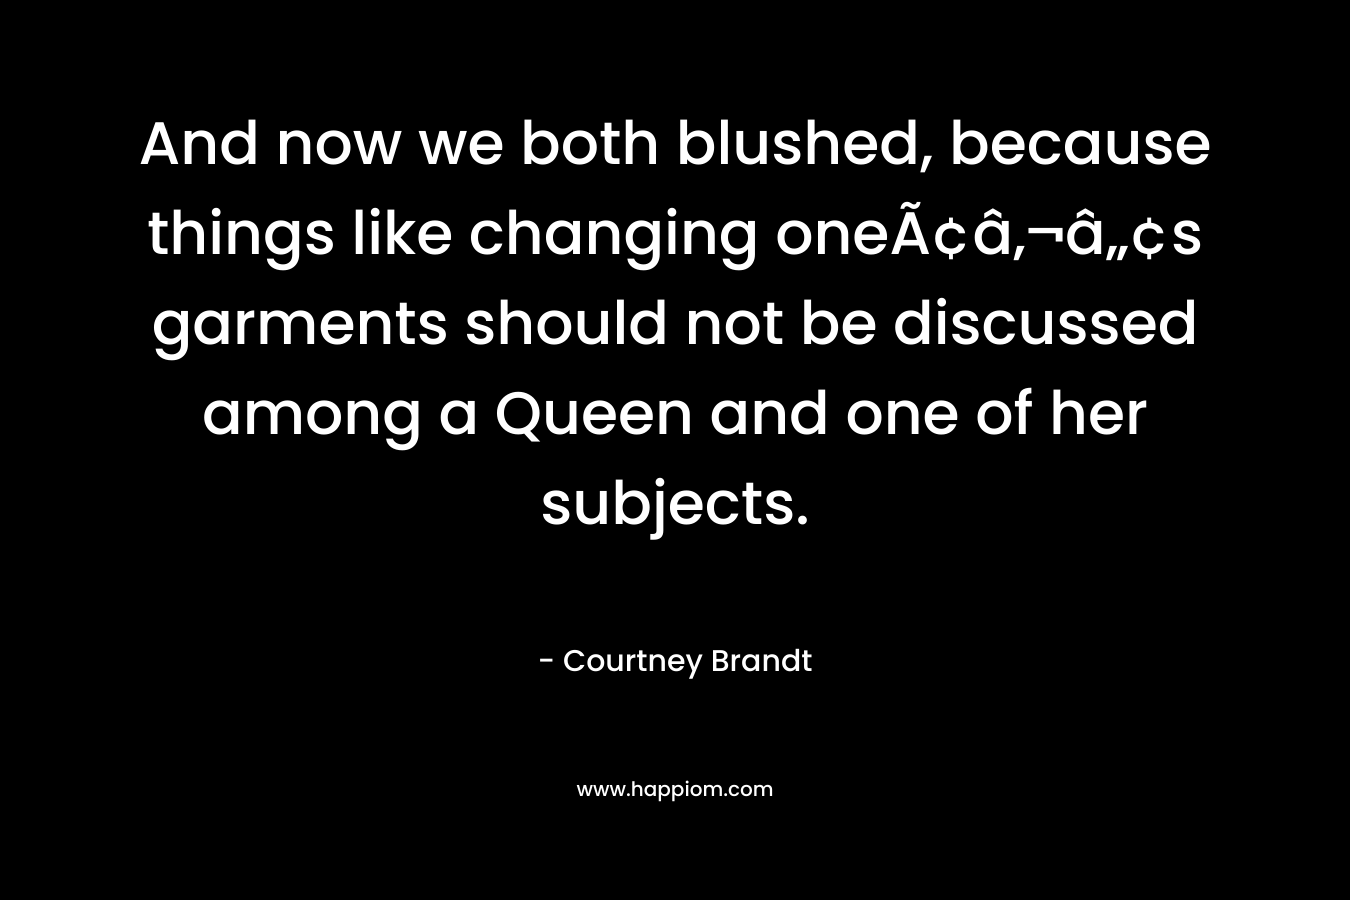 And now we both blushed, because things like changing oneÃ¢â‚¬â„¢s garments should not be discussed among a Queen and one of her subjects. – Courtney Brandt